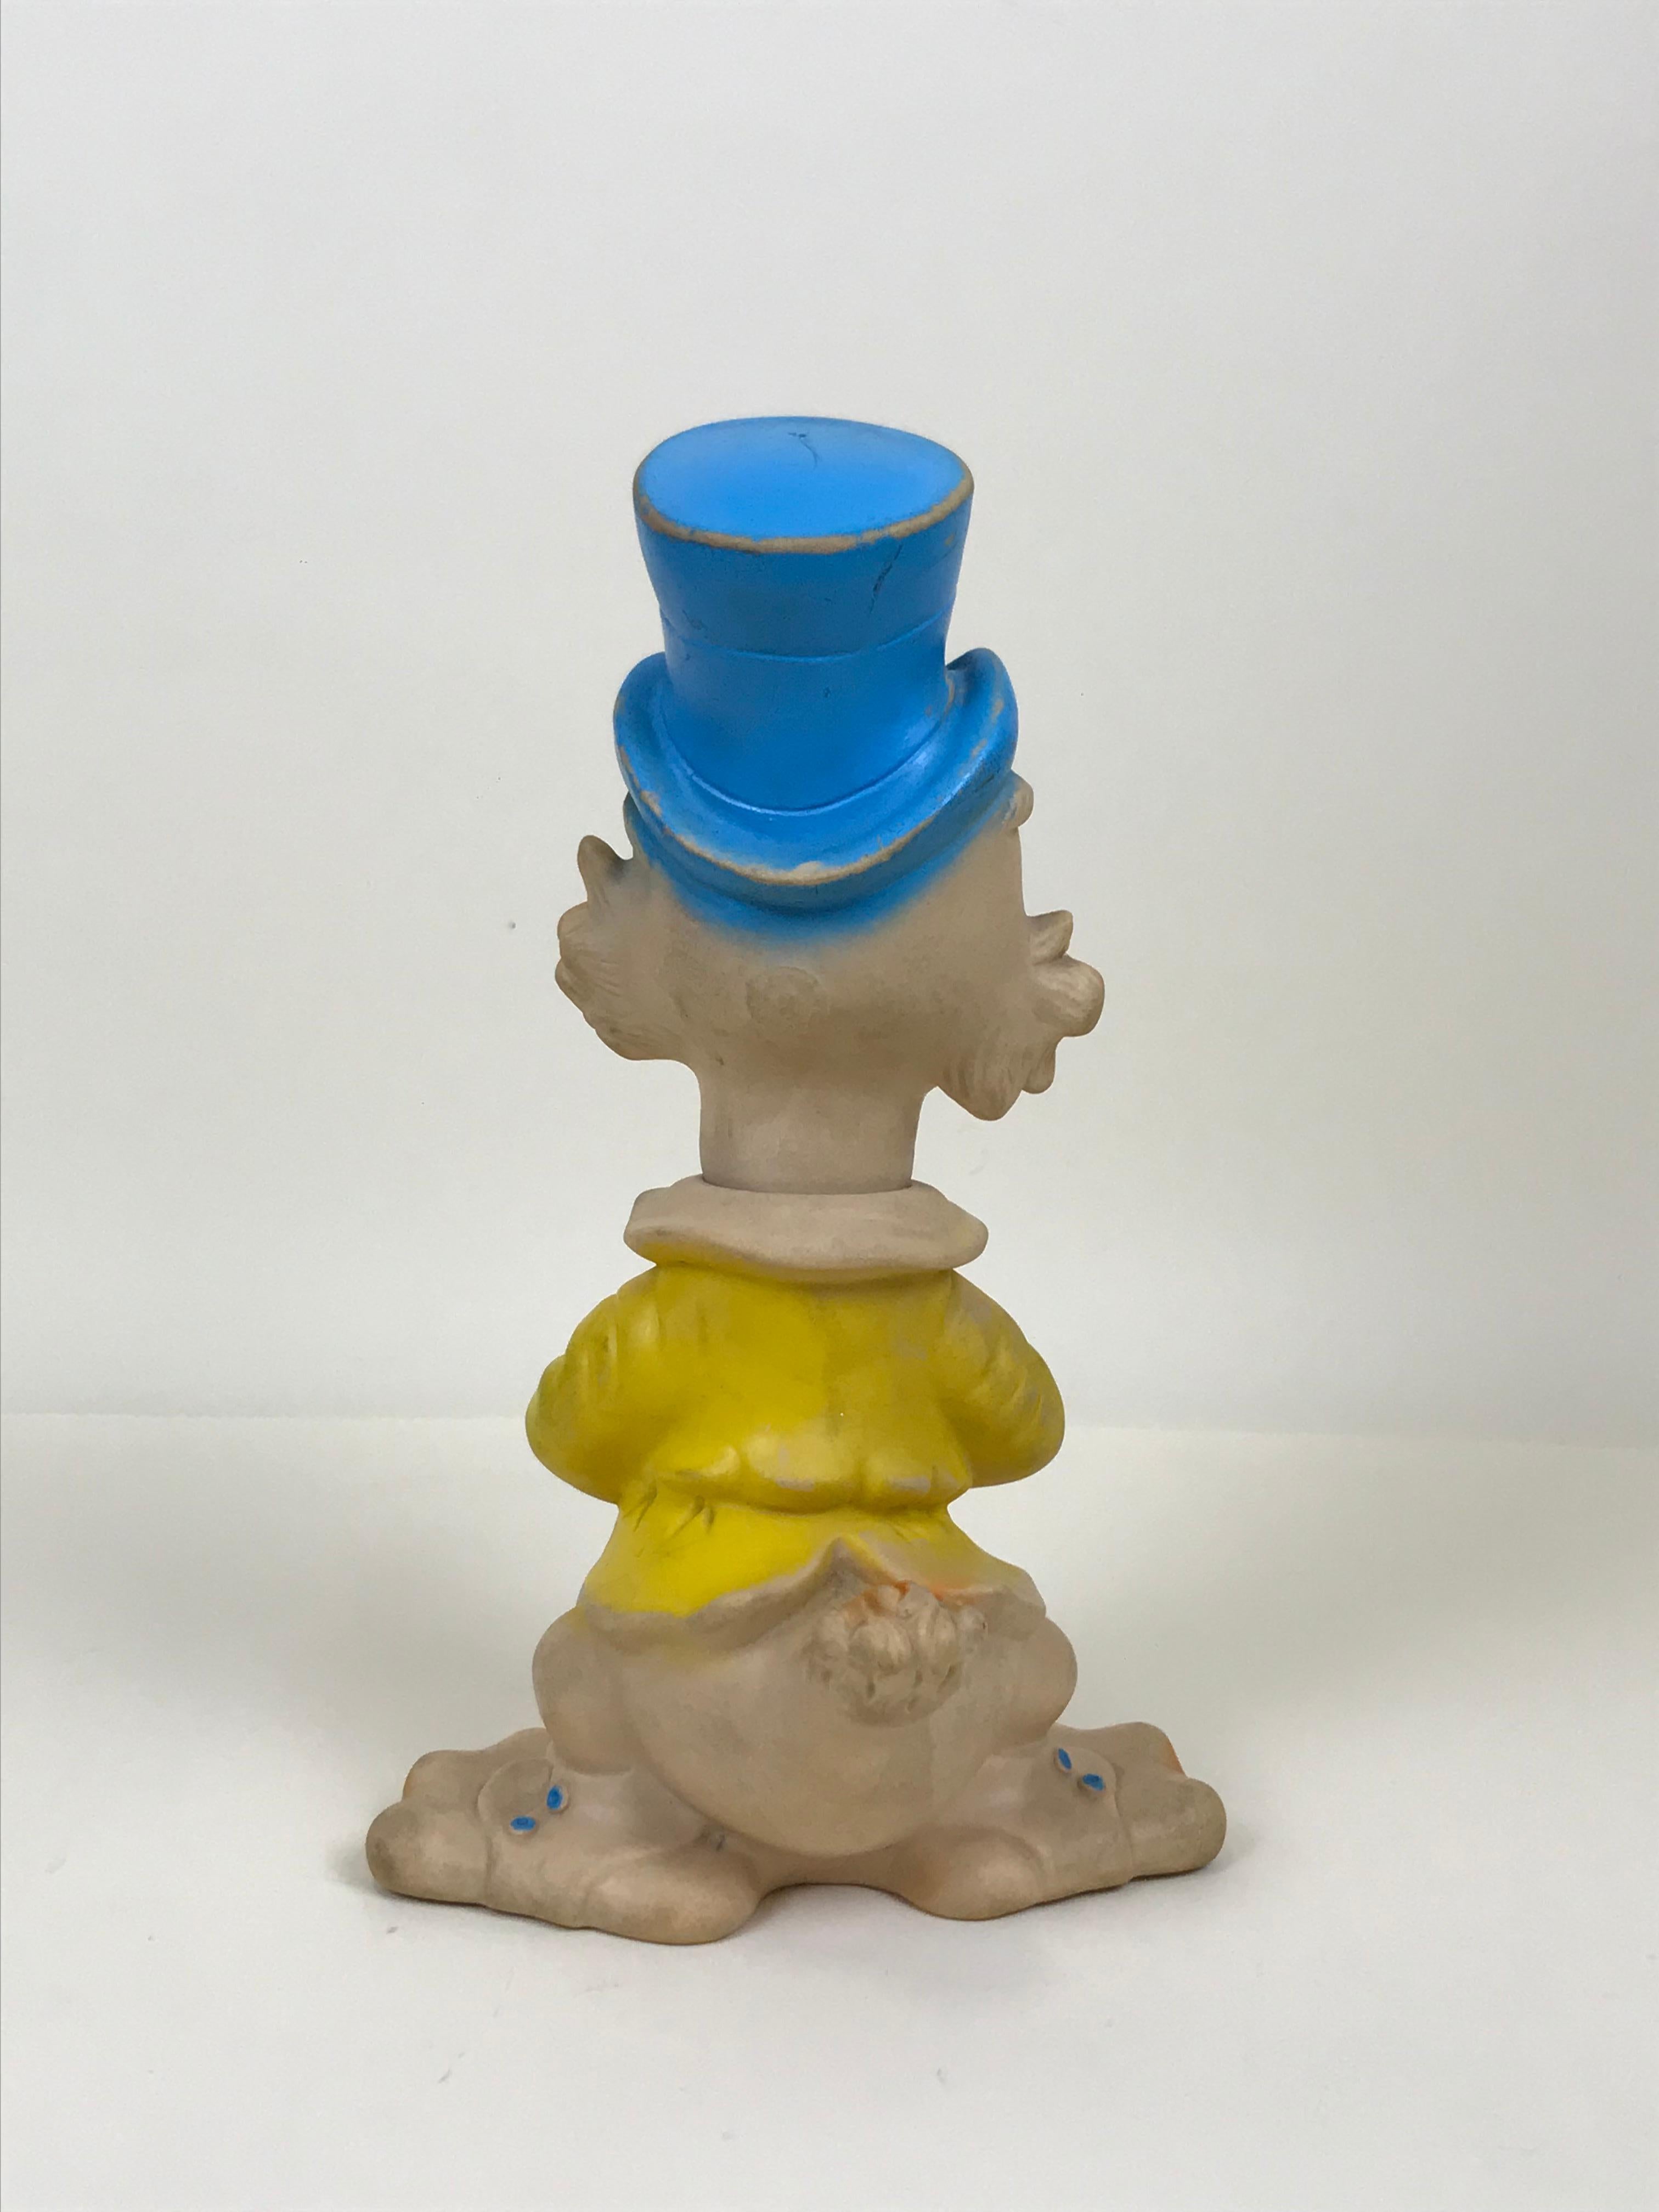 Croatian 1960s Vintage Yellow Uncle Scrooge Squeak Toy Made in Ex Yugoslavia by Biserka  For Sale